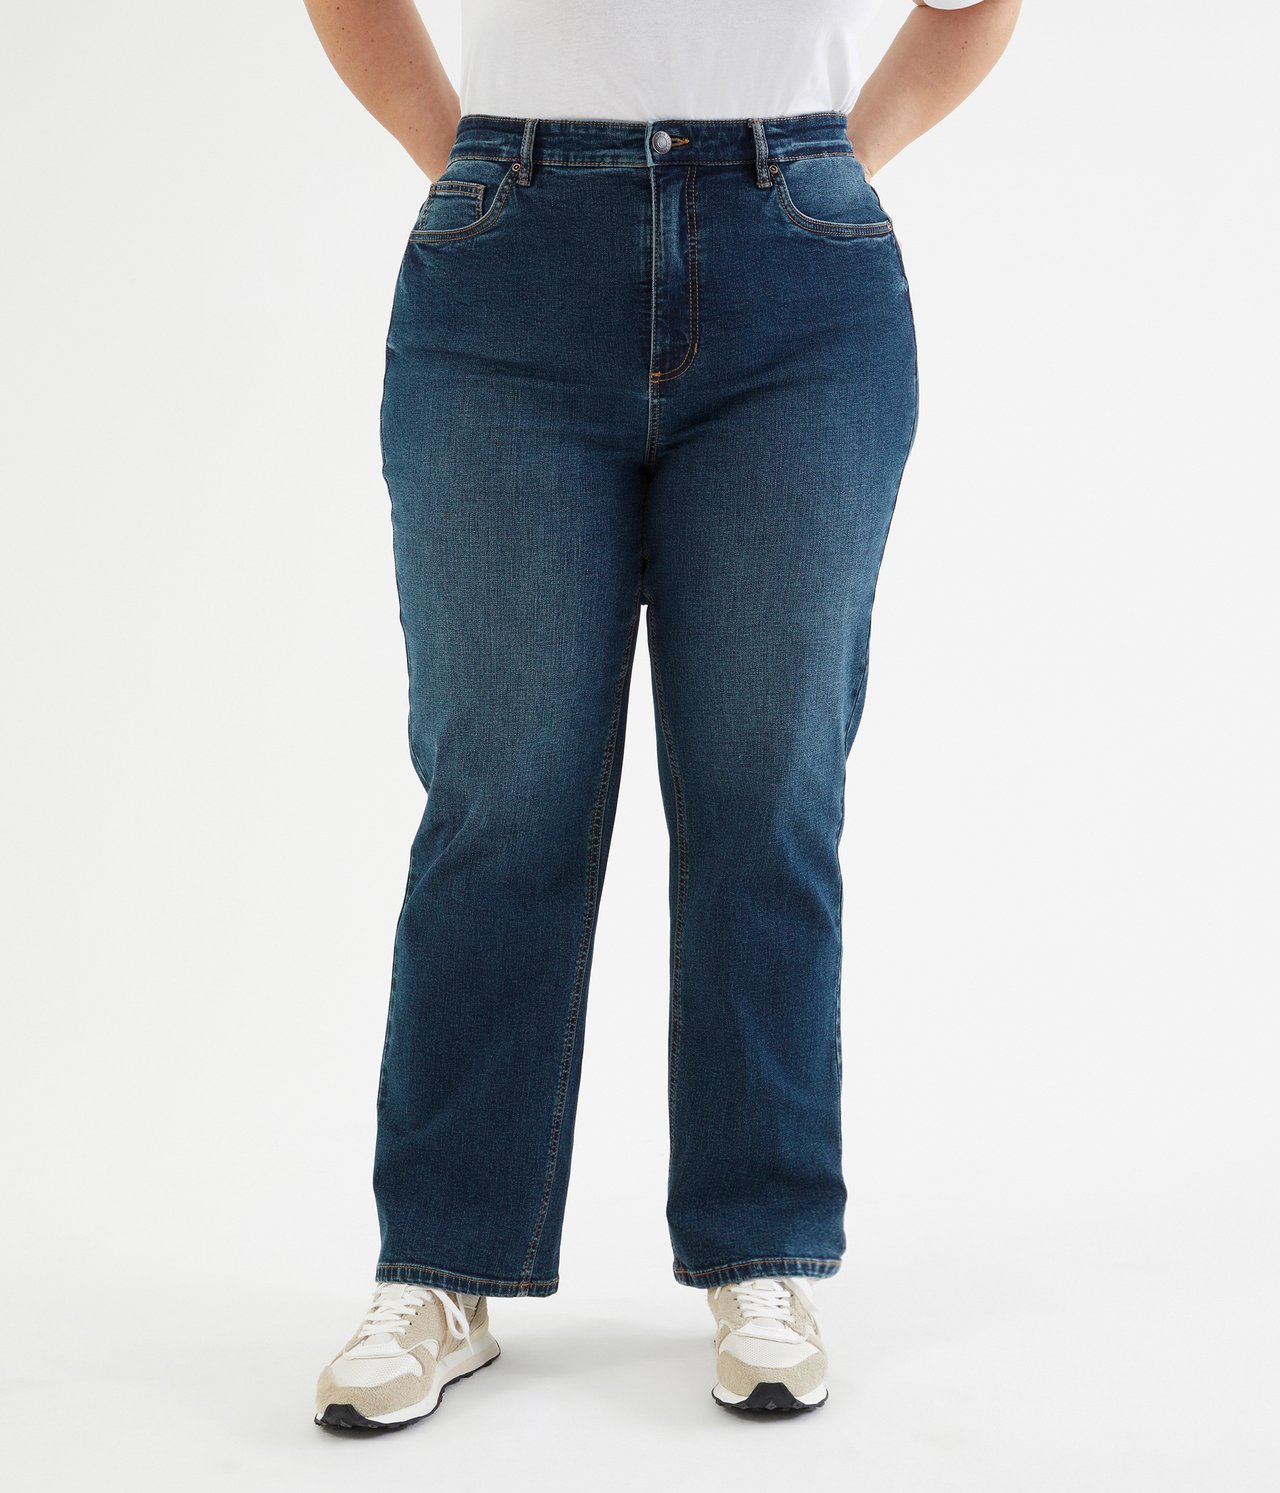 Penny jeans straight fit - Denim - 2